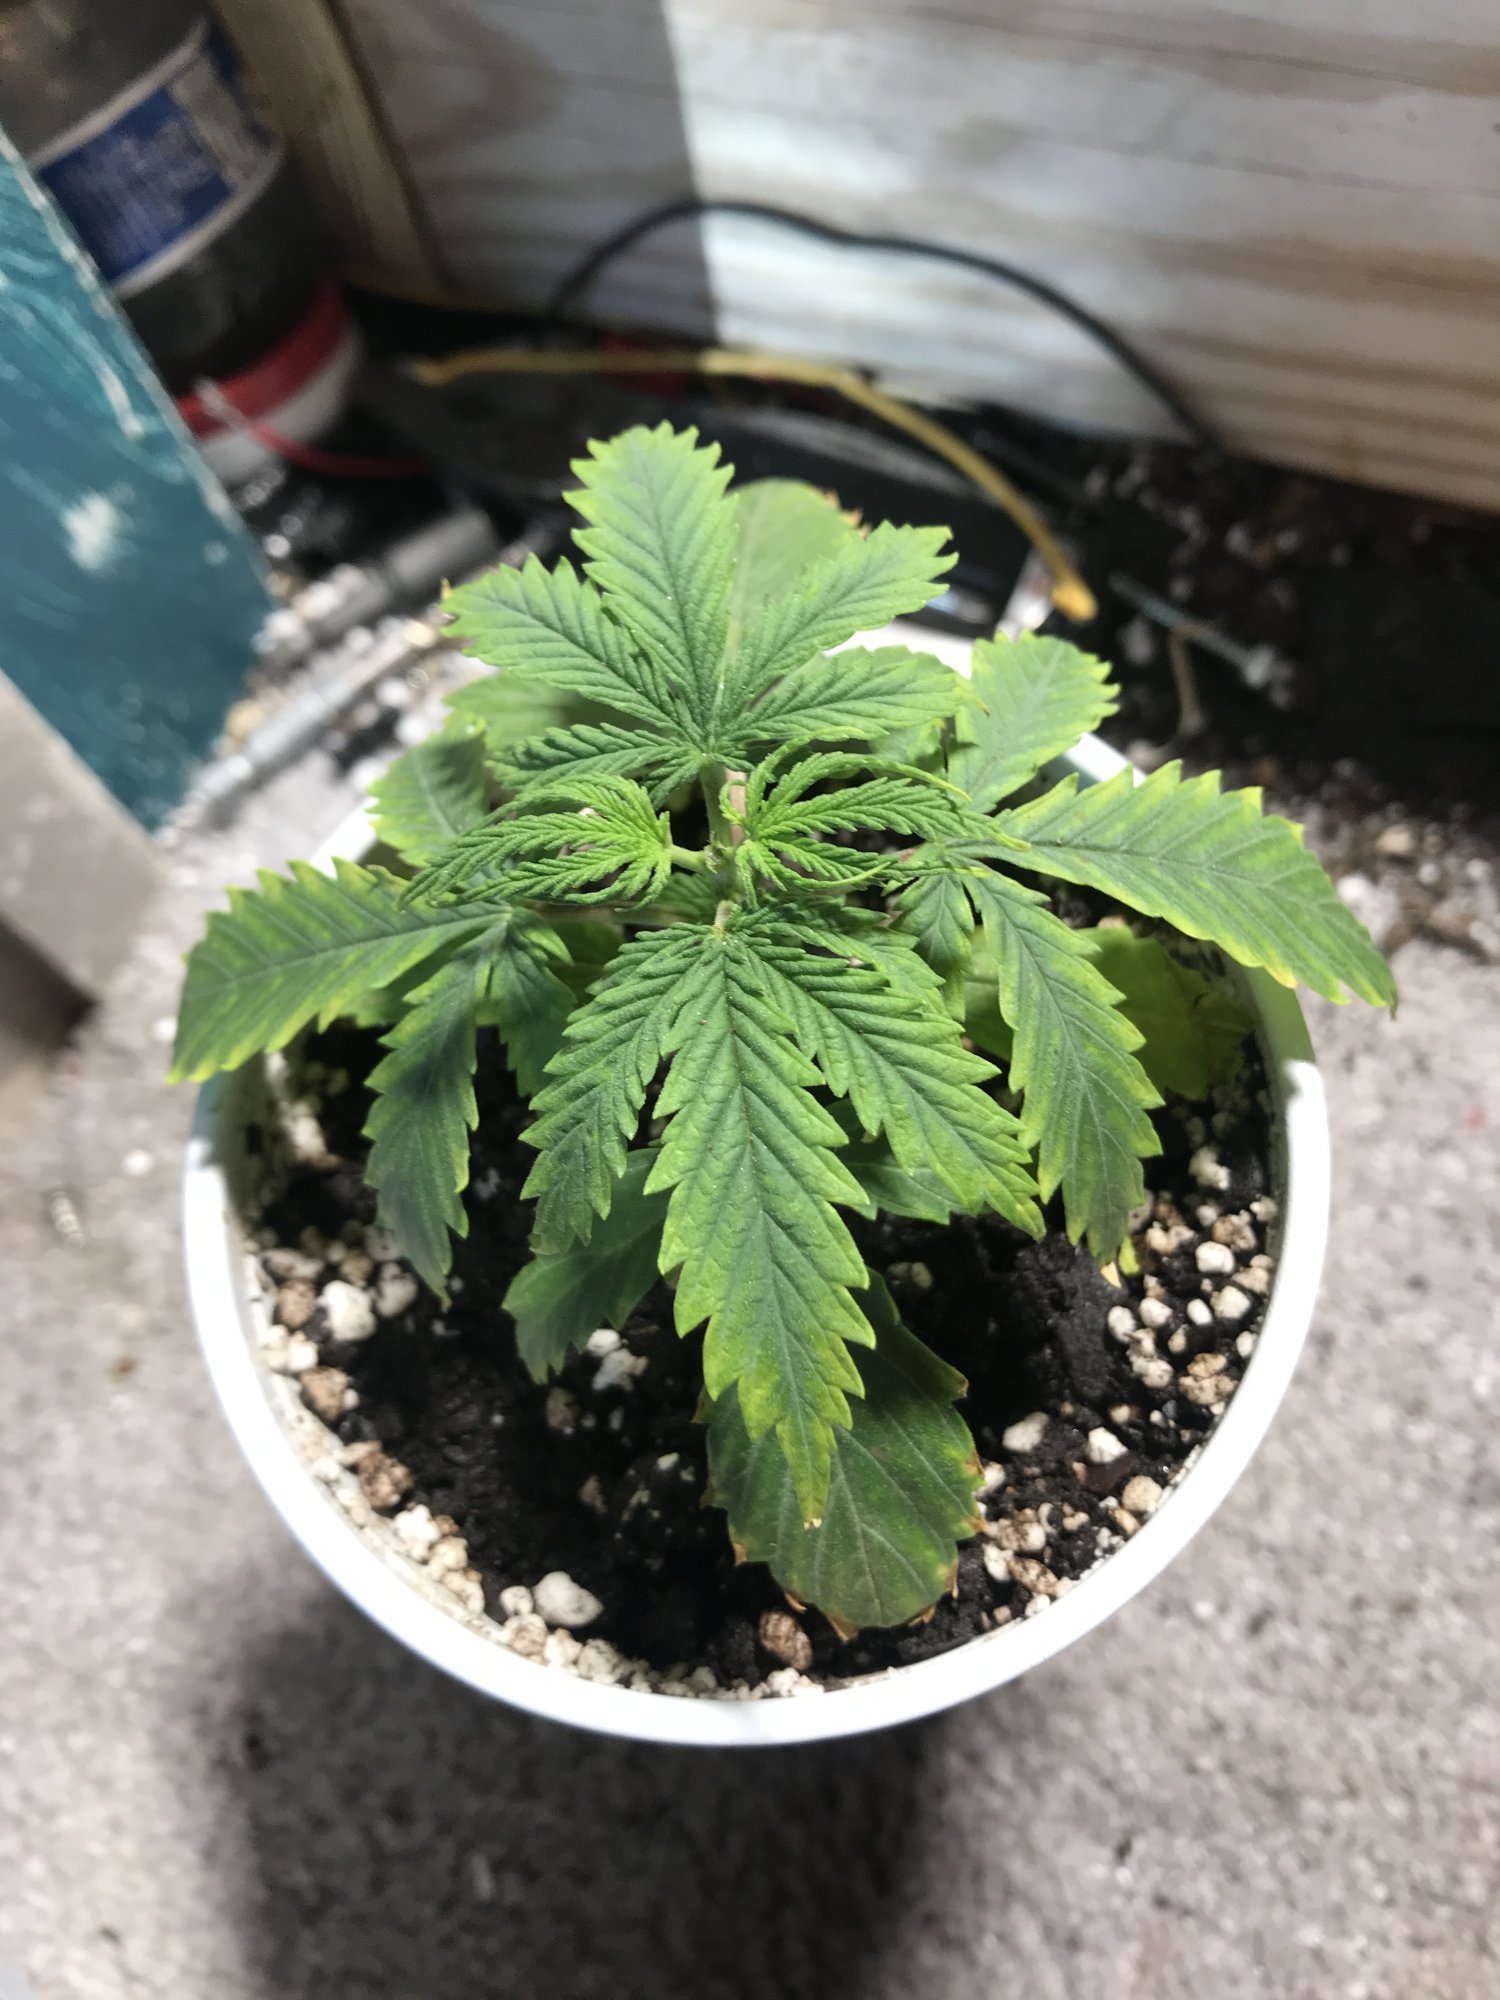 Can some one tell me what is wrong with my plant